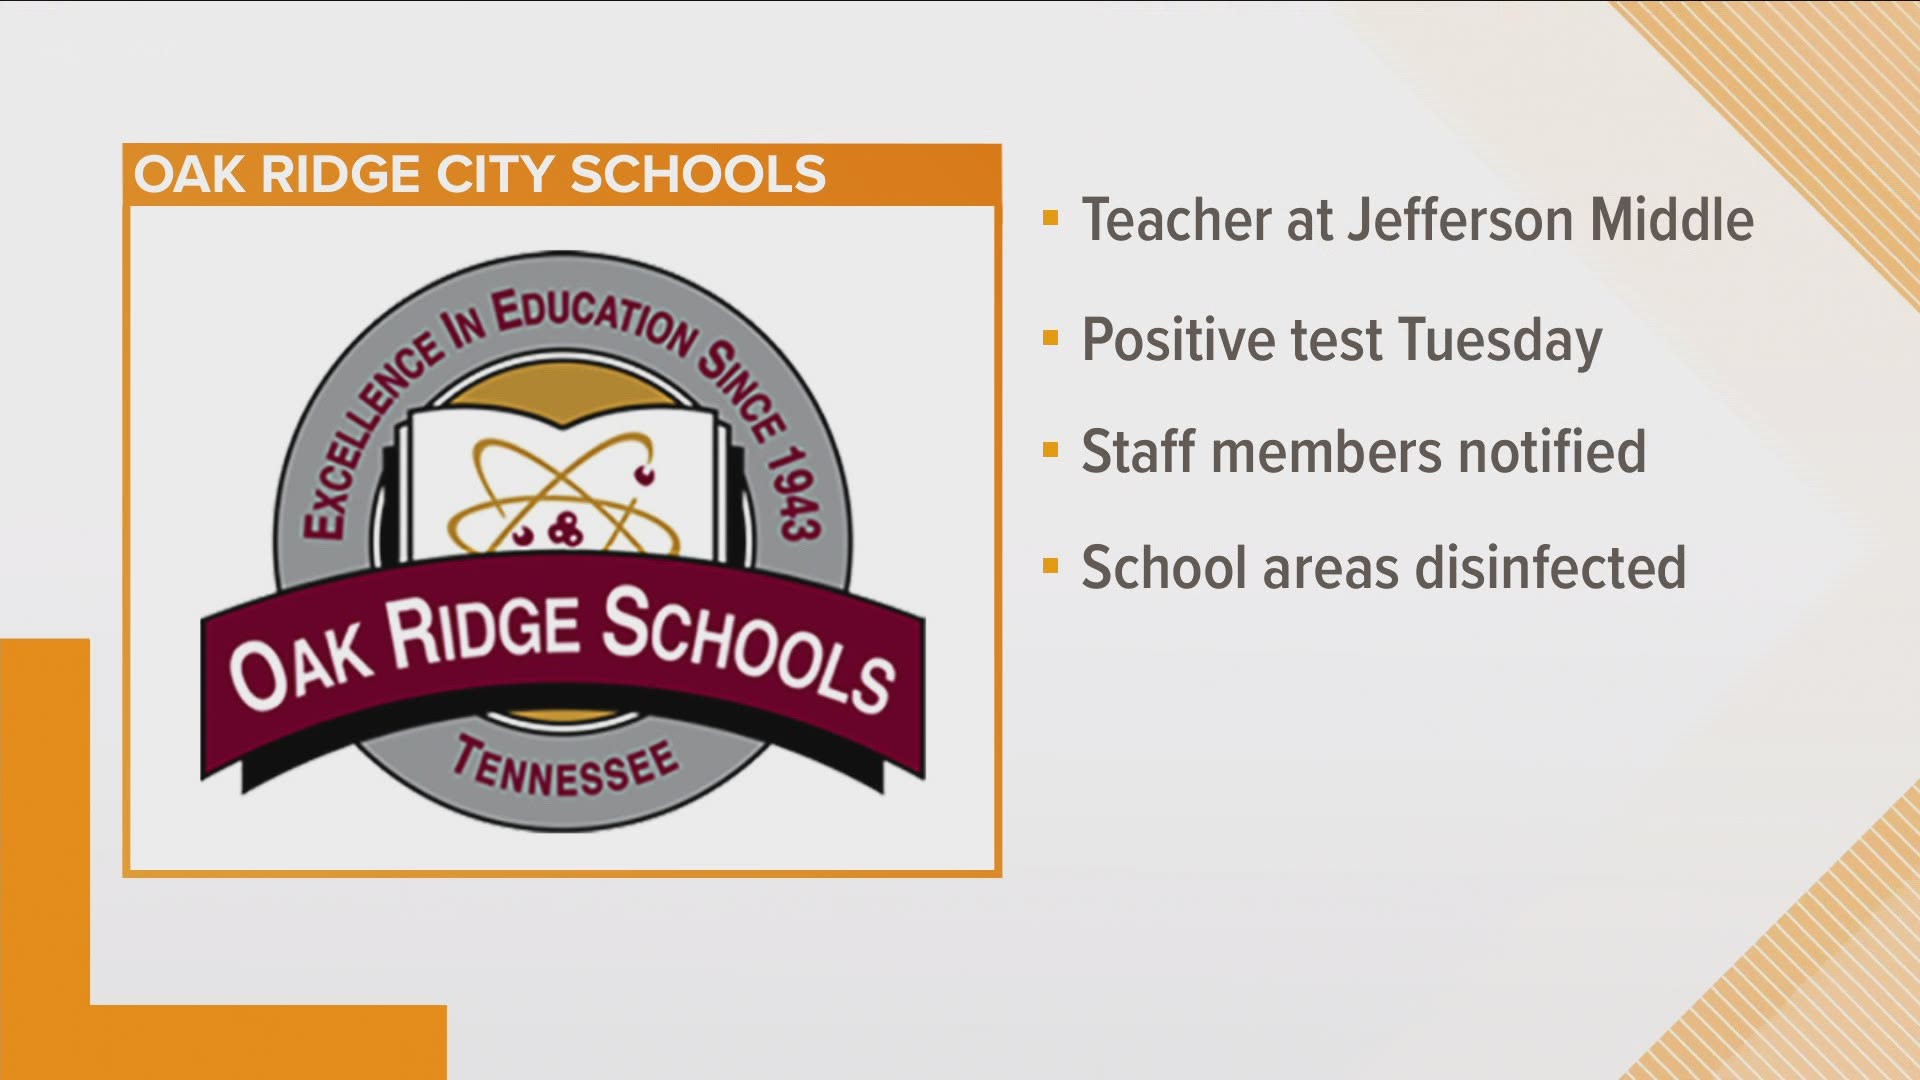 The school district announced a teacher tested positive for the virus at Jefferson Middle School in Oak Ridge. The school is taking precautions to keep students safe